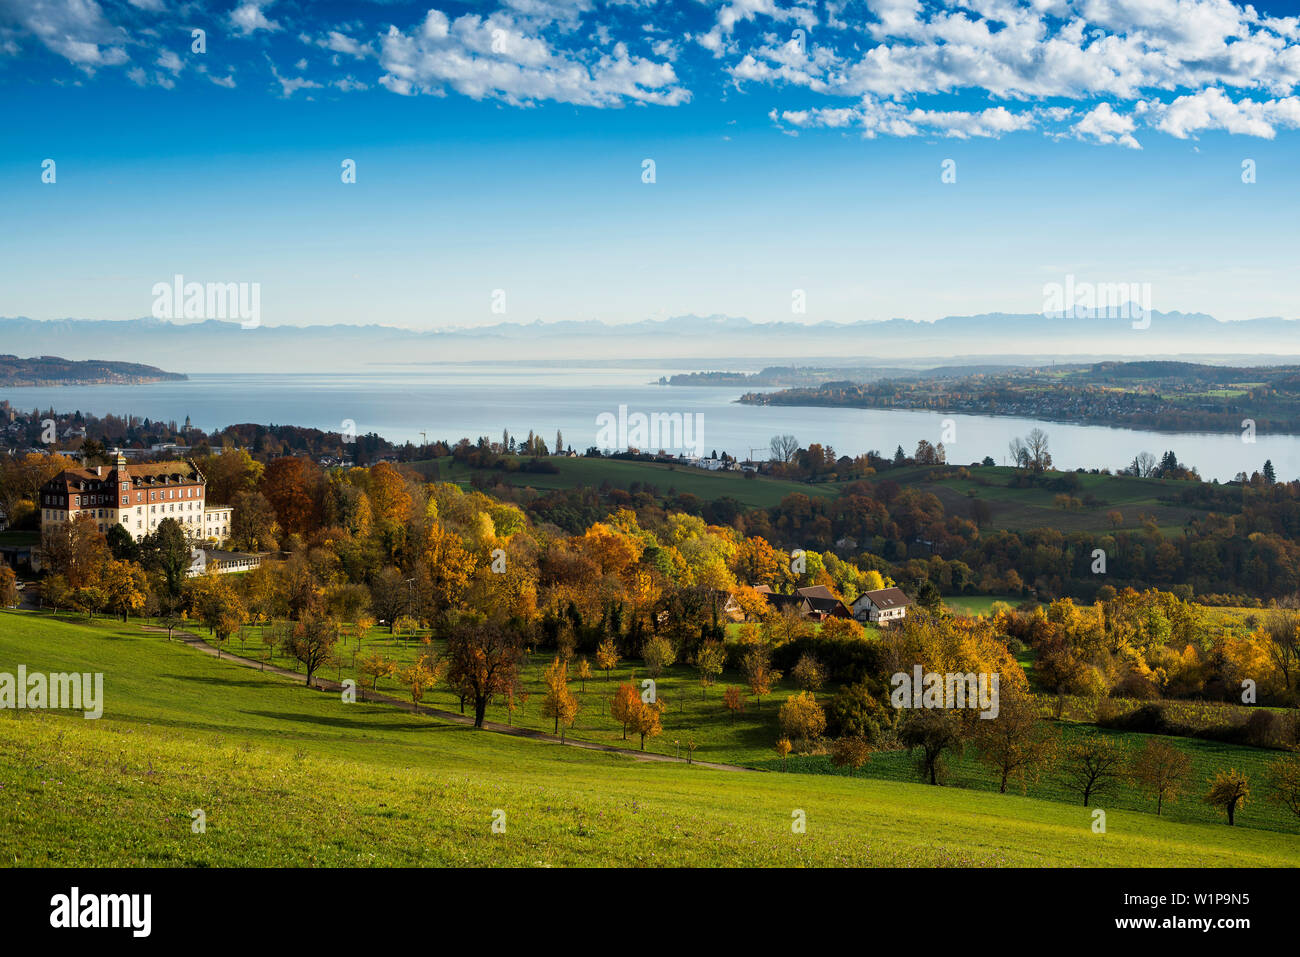 View of Spetzgart Castle over Lake Constance to the Alps in autumn, Überlingen, Baden-Württemberg, Germany Stock Photo